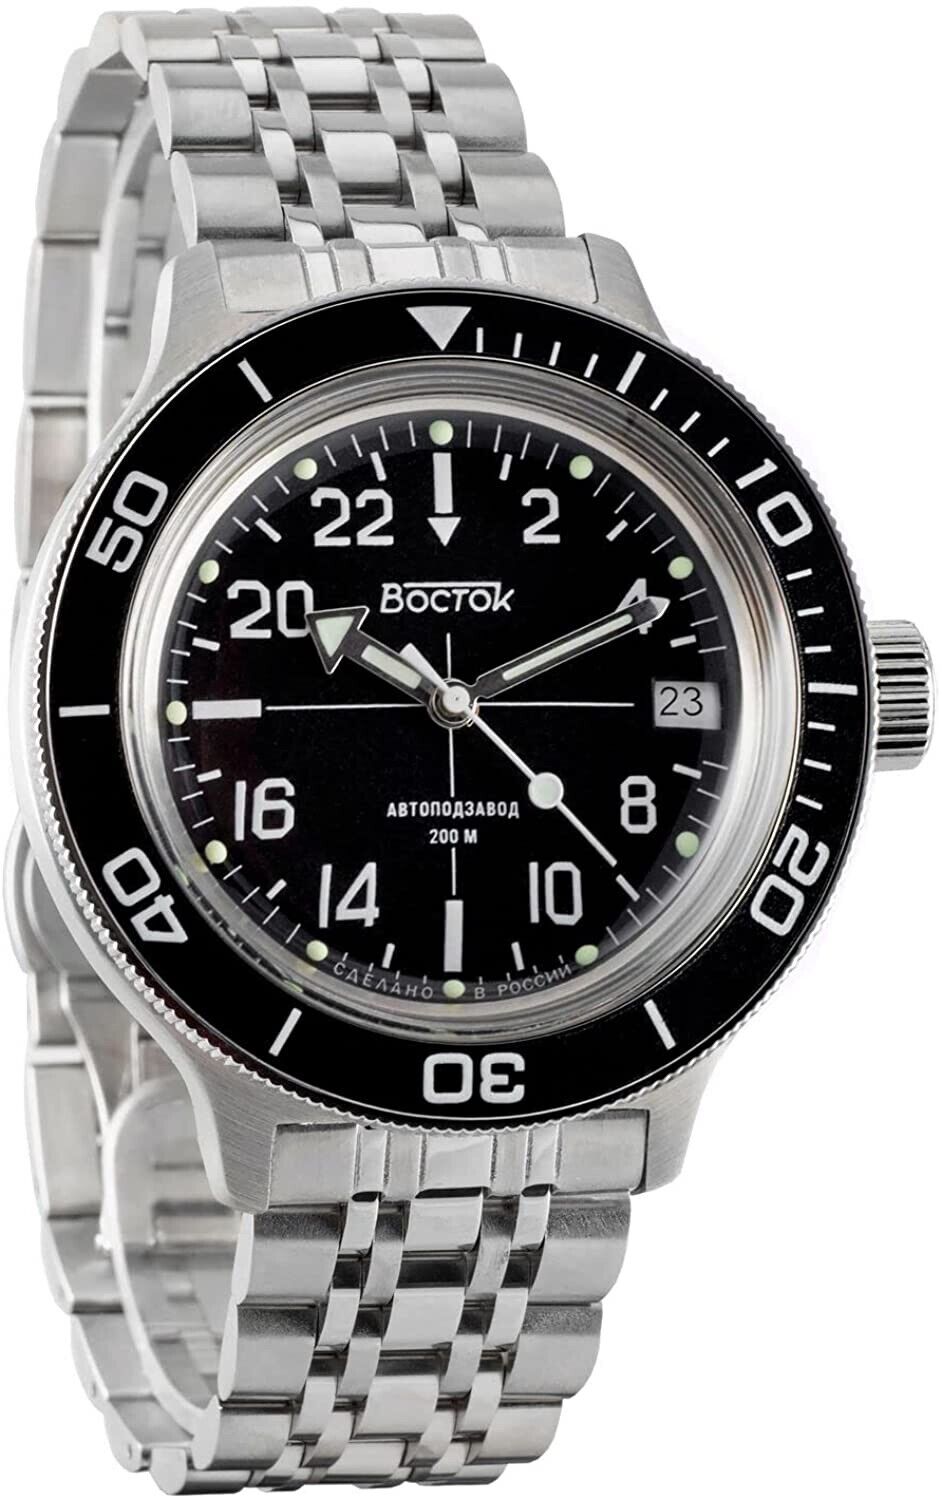 NEW Vostok Amphibia 720076 Russian Military Watch Automatic Black Dial 24 Hours